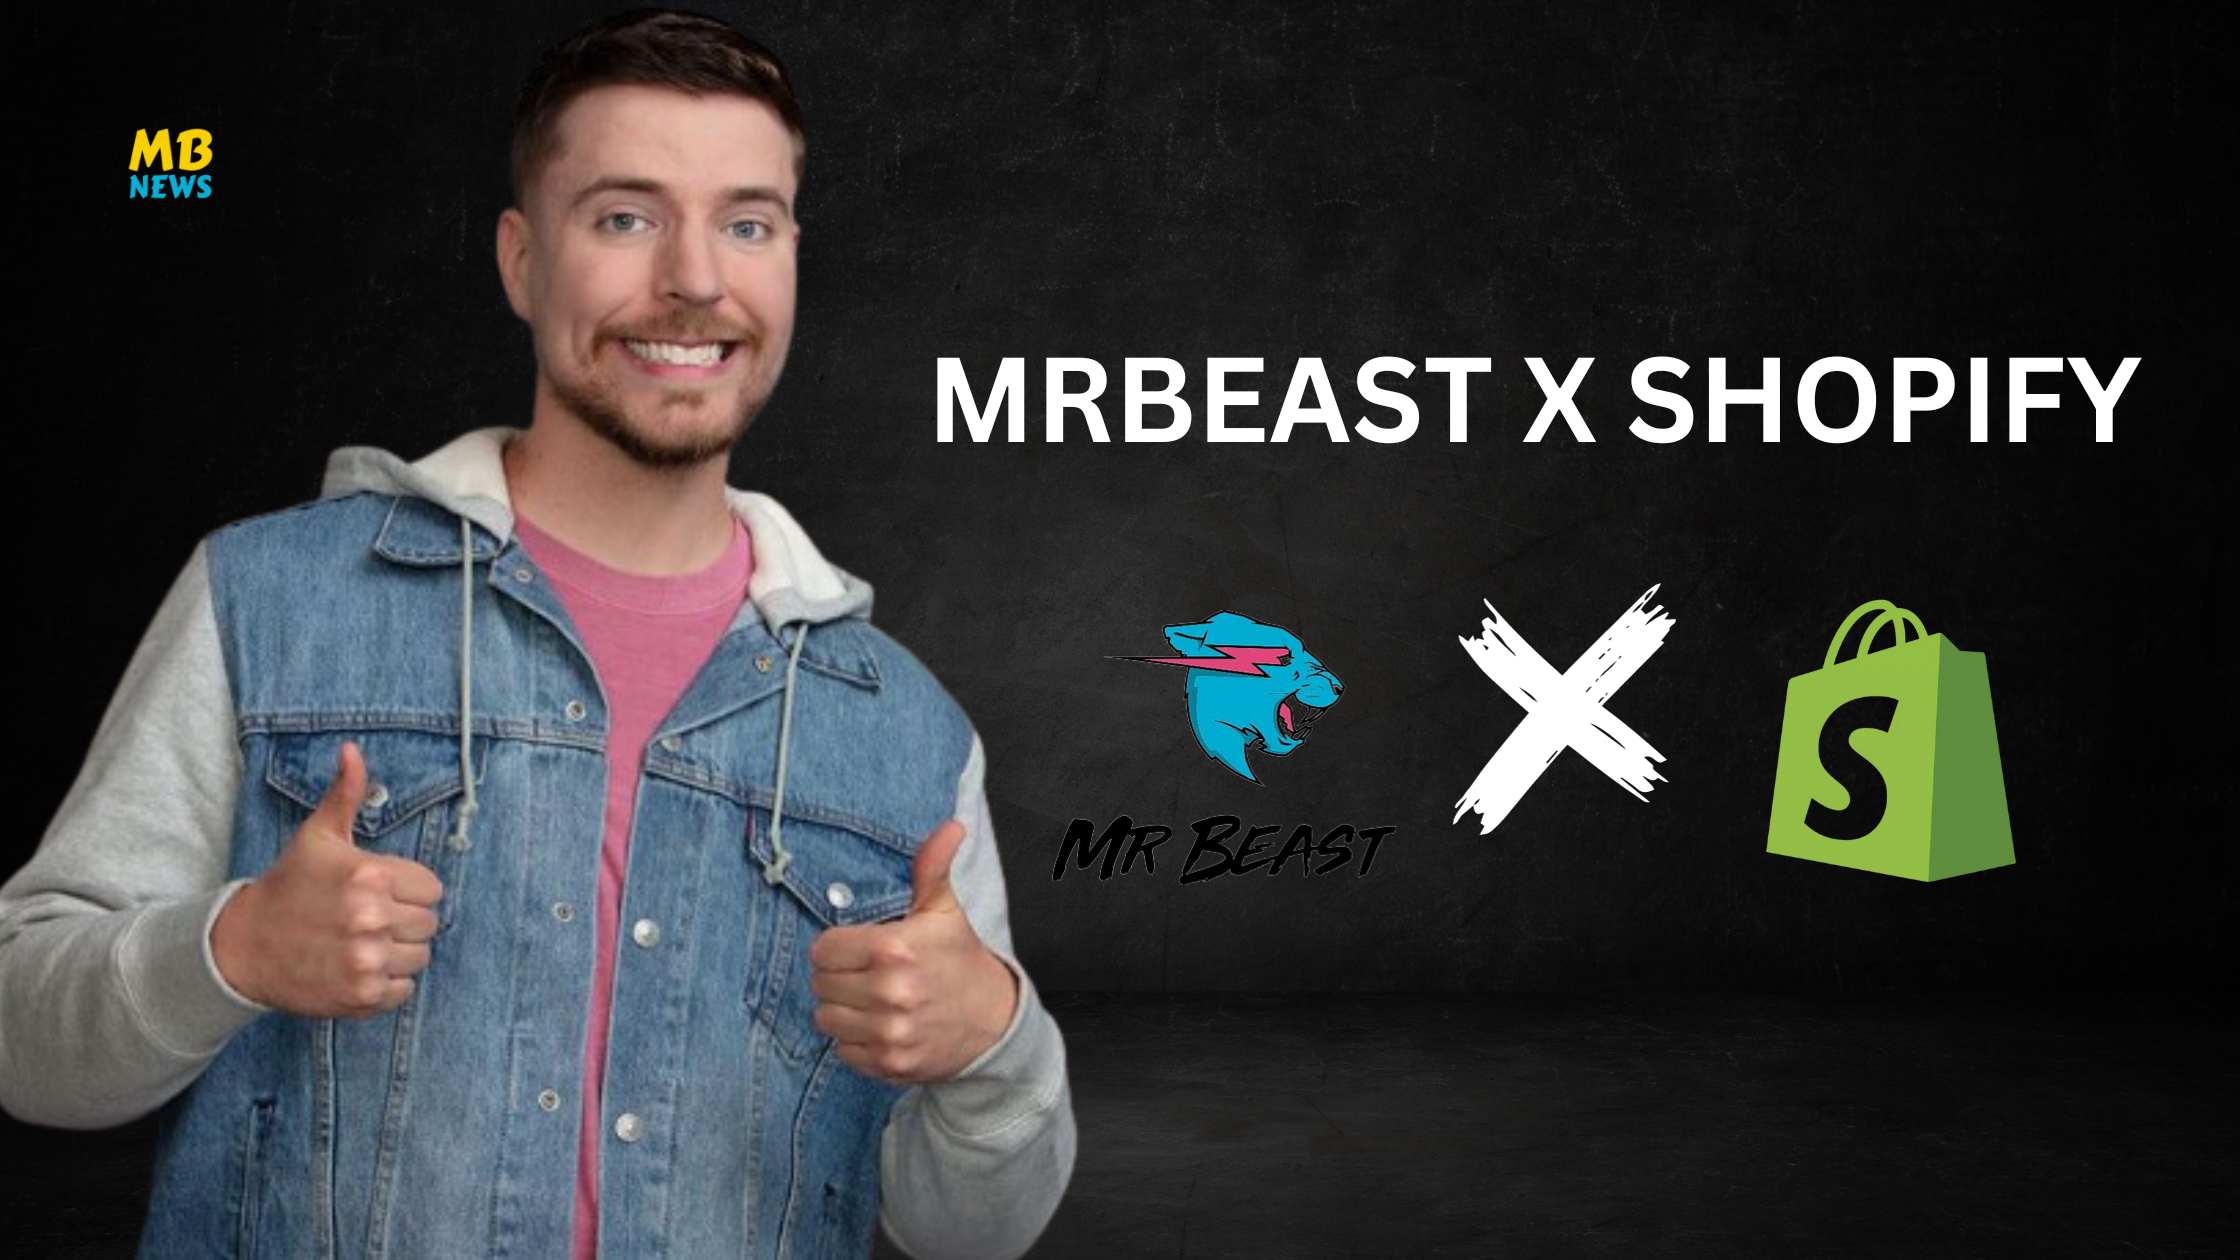 MrBeast's NYC Feastables Pop-Up For a Secret Mission With Shopify: Limited Time Slots Available!